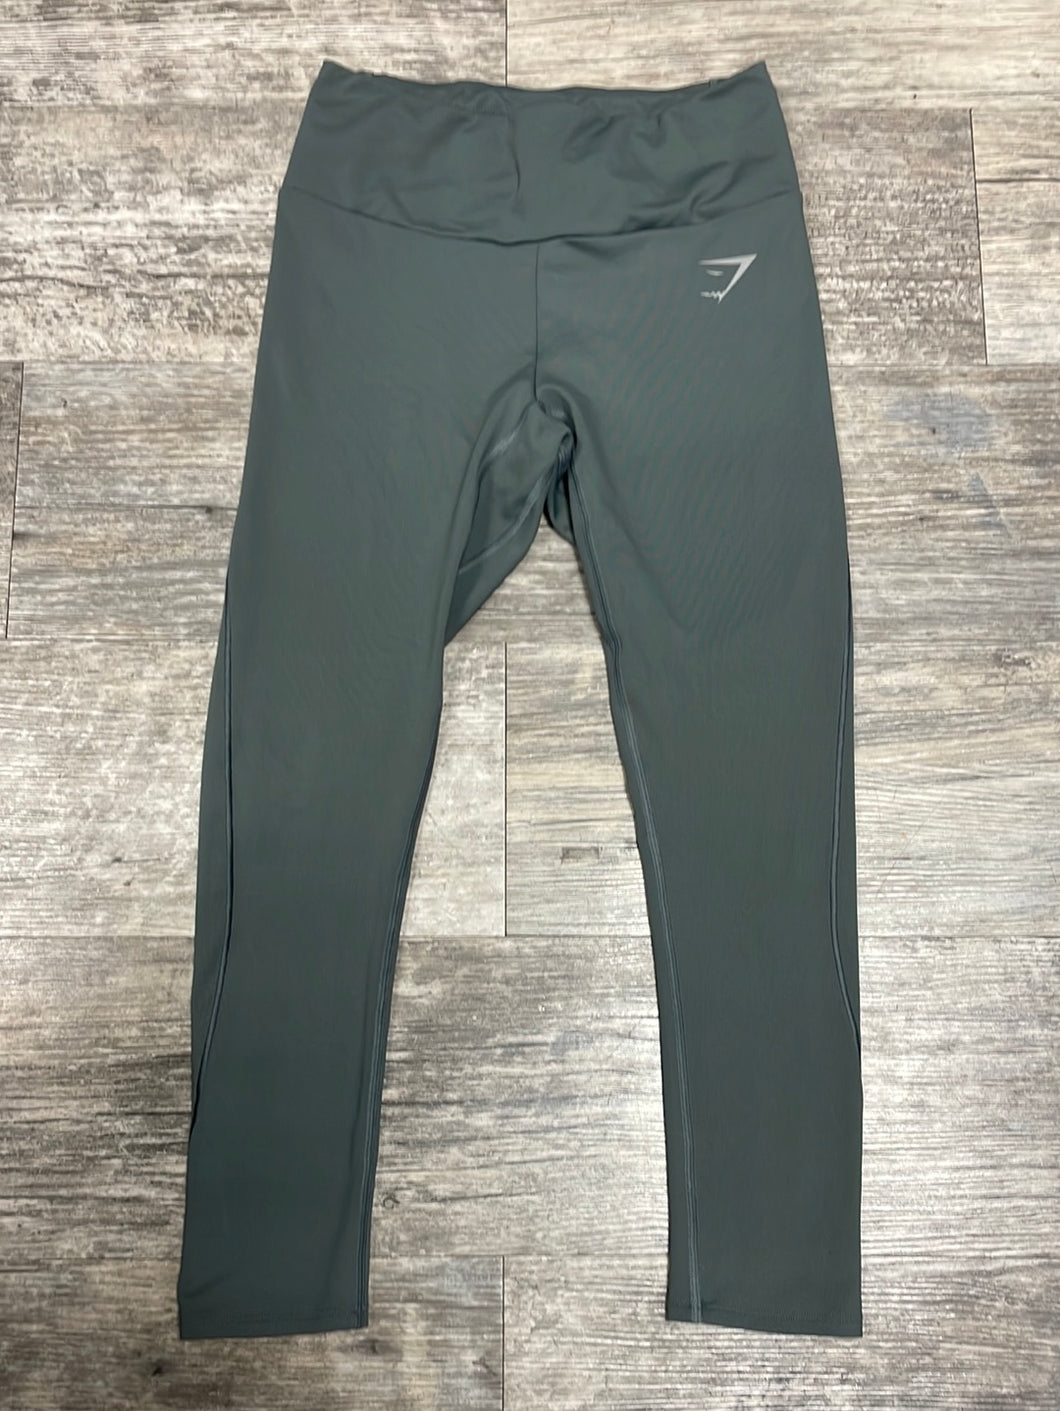 Gymshark Women's Athletic Pants Size Small